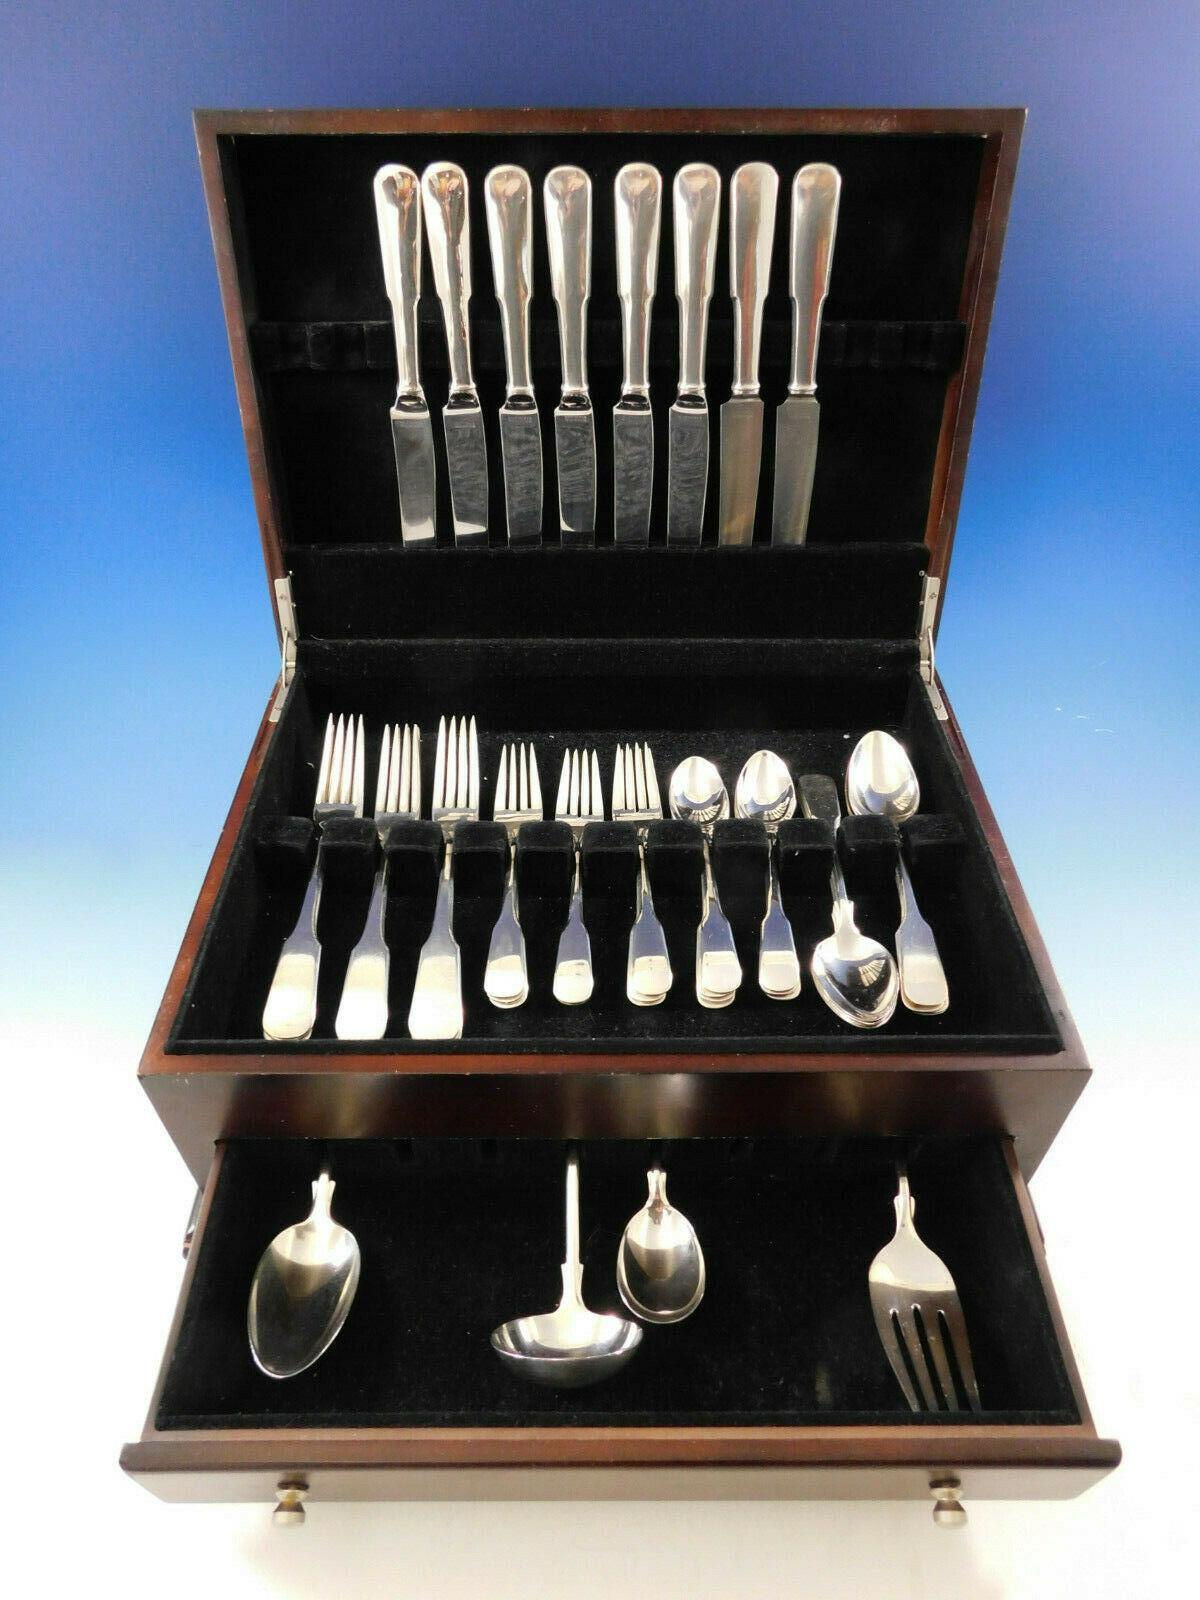 Dinner size 1810 by International sterling silver flatware set of 43 pieces. This set includes:

8 dinner size knives, 9 5/8